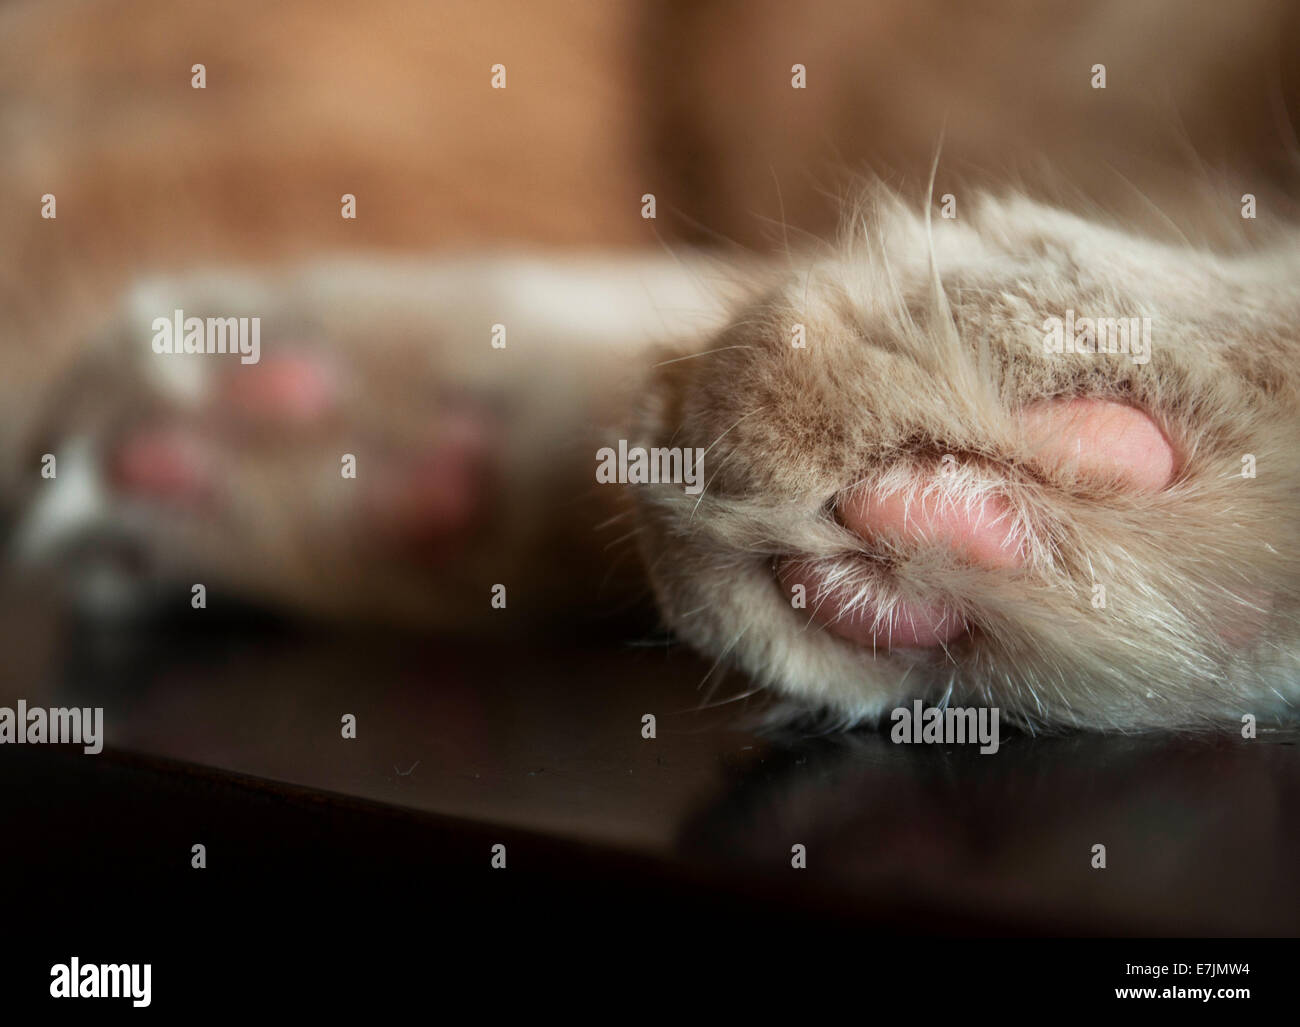 Close up of two cream colored cat paws Stock Photo